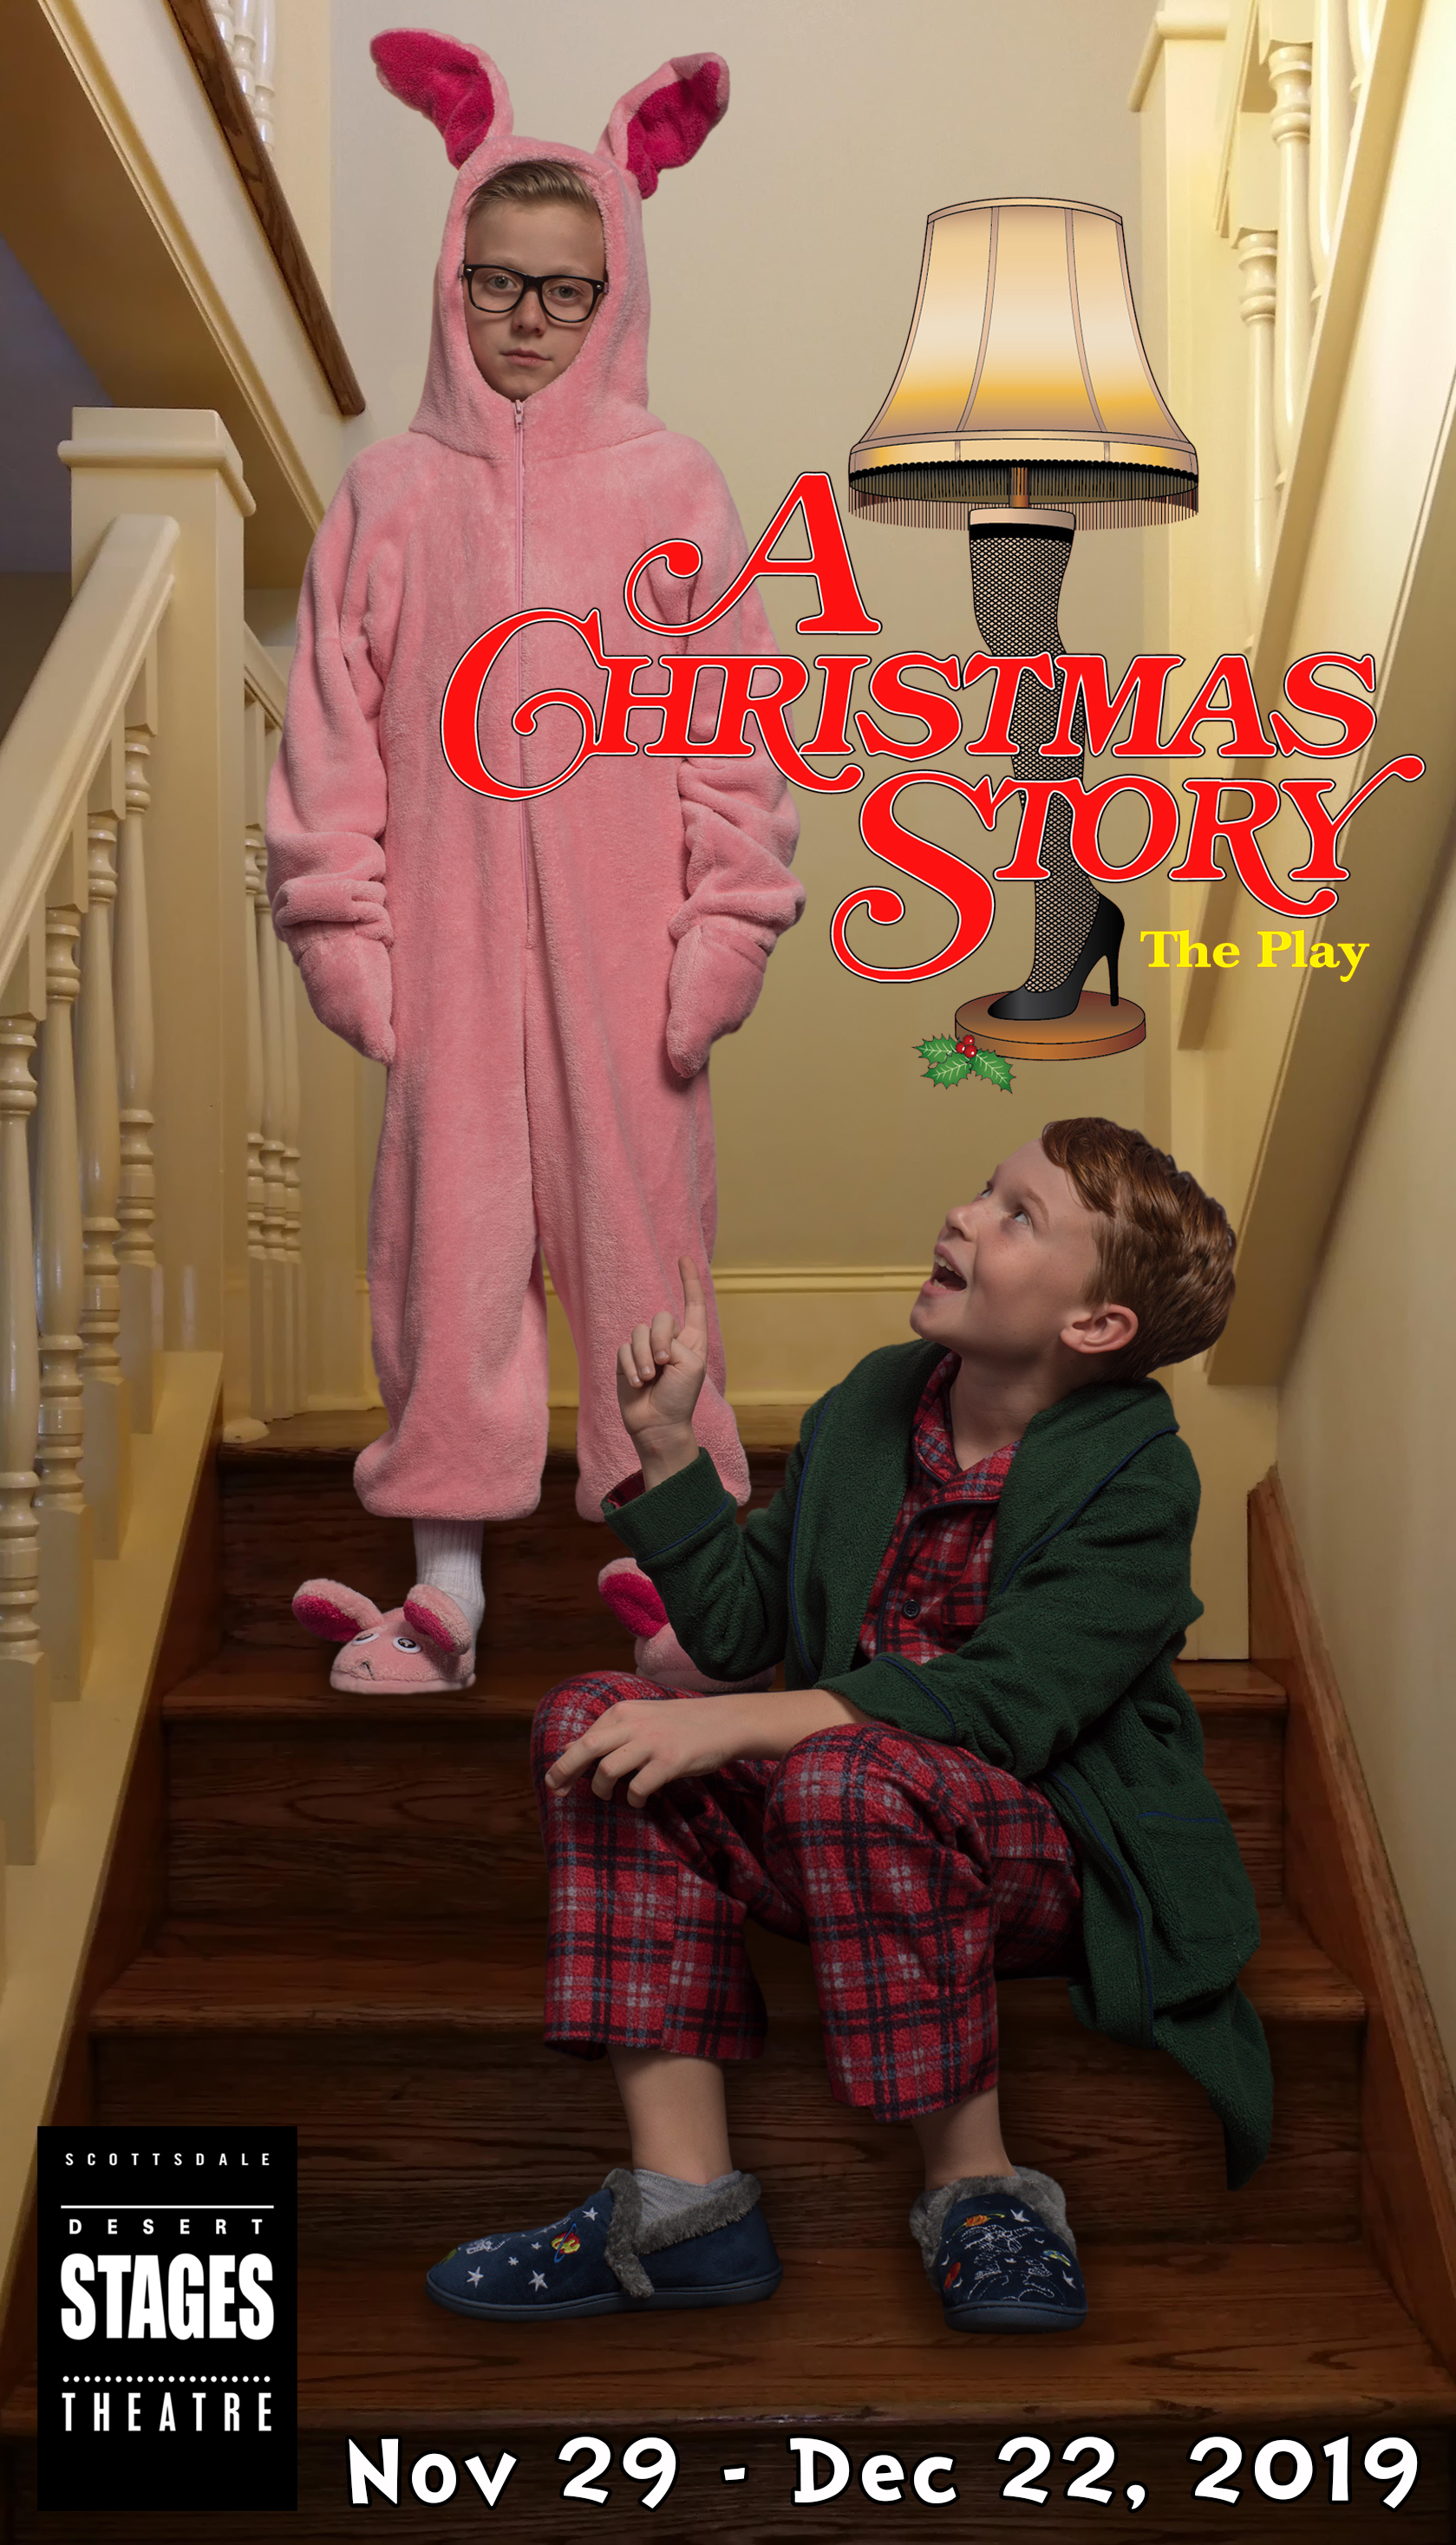 Desert Stages Presents The Humorous Holiday Classic A CHRISTMAS STORY 